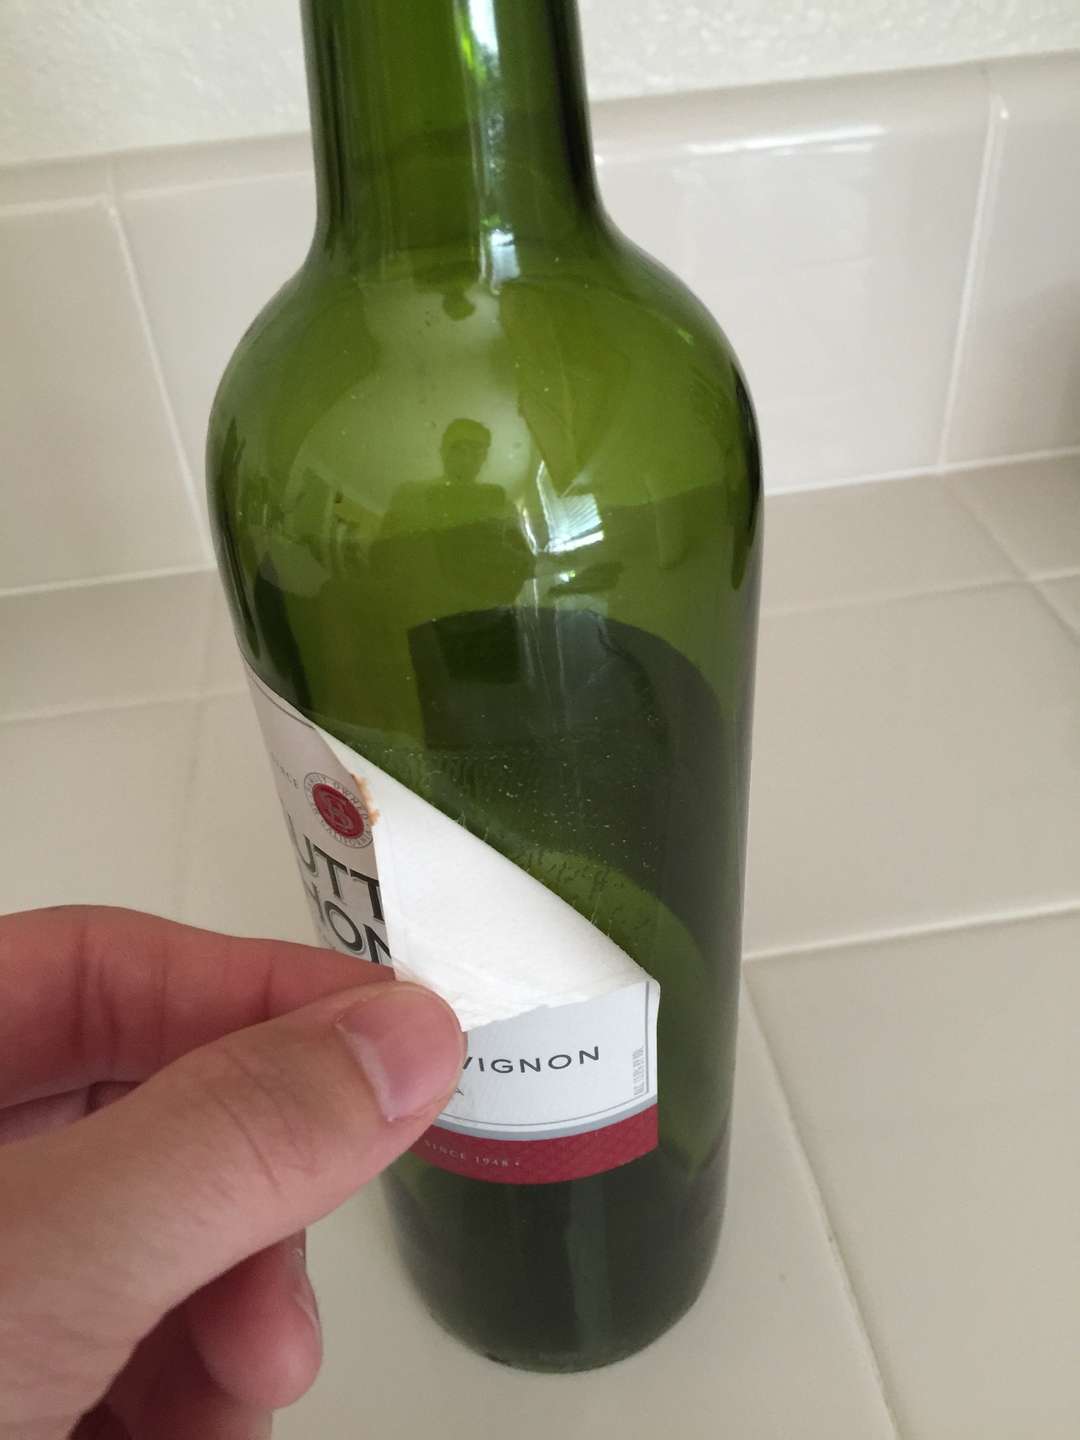 How to remove the label from a wine bottle the easy way